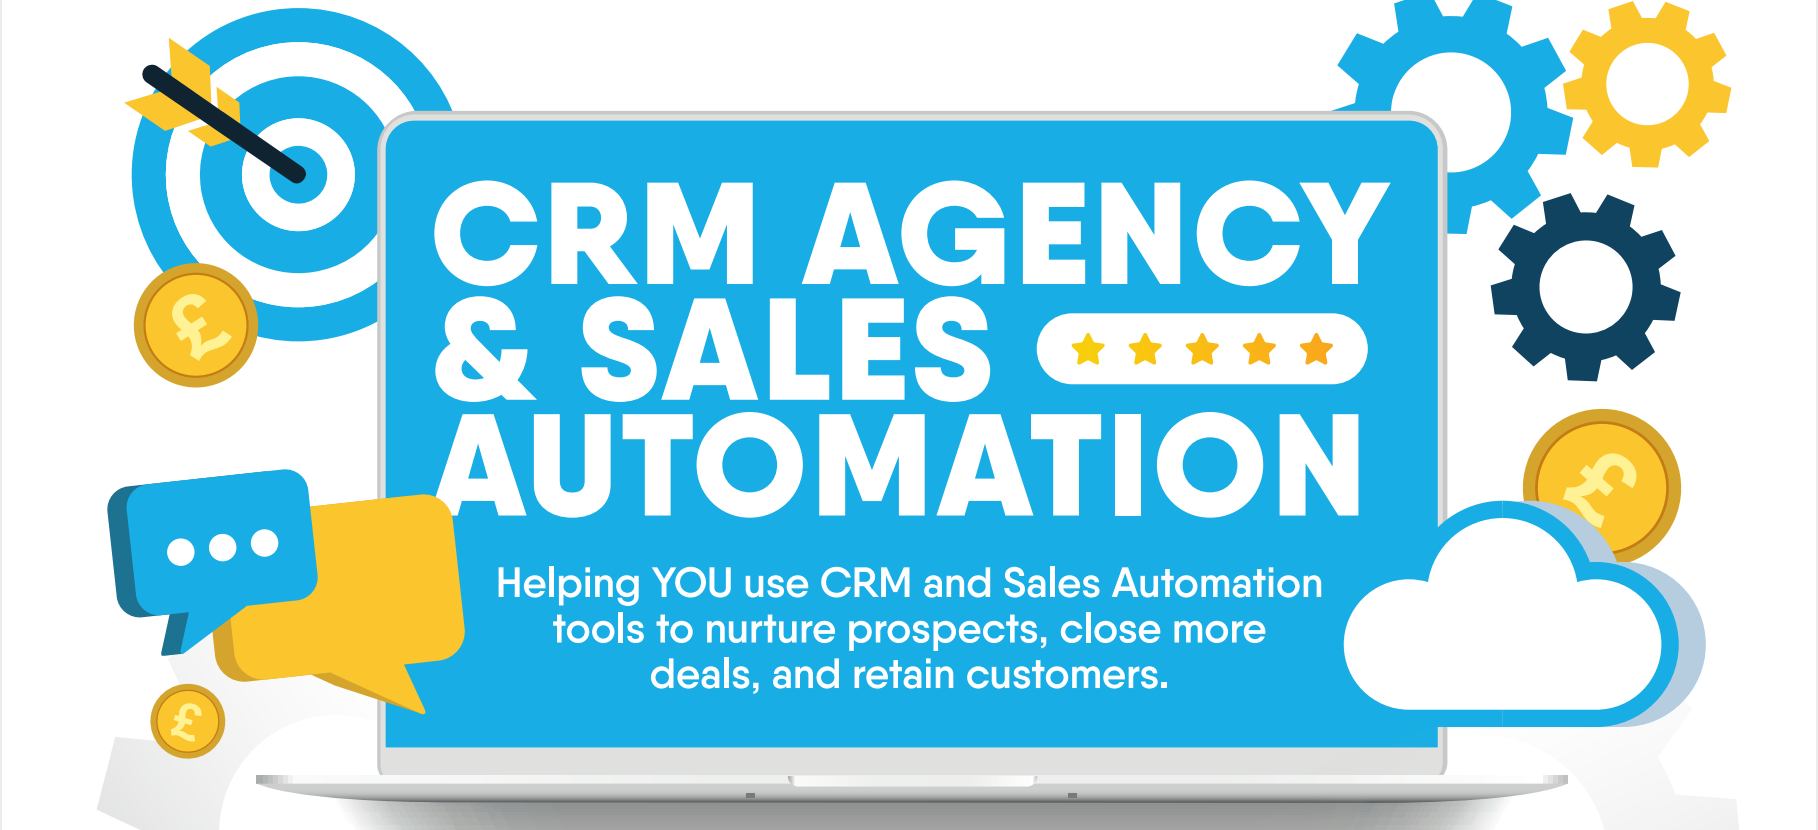 crm-agency-and-sales-automation-header